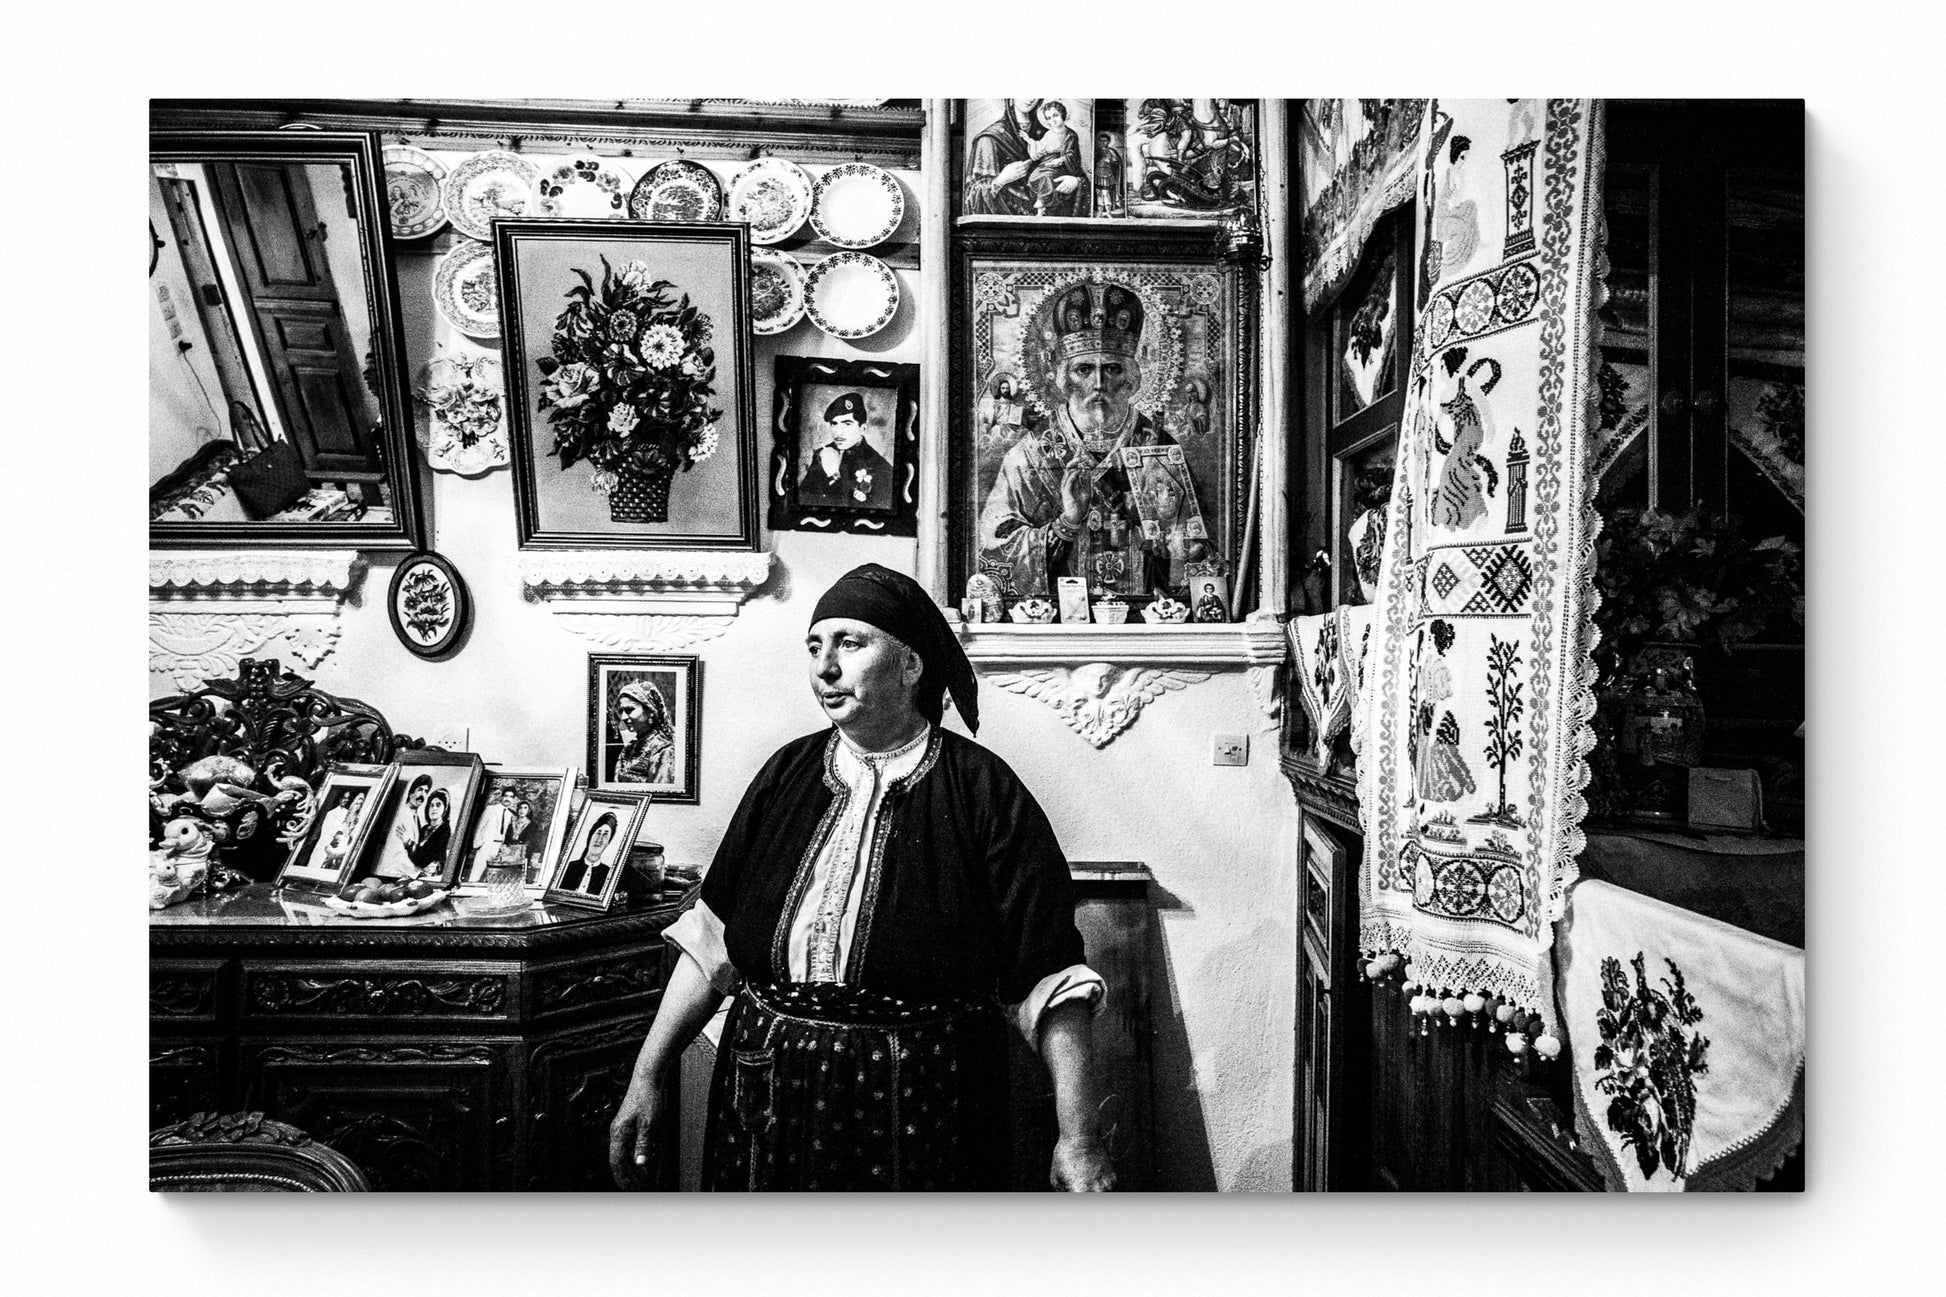 Black and White Photography Wall Art Greece | Woman in a traditional house Olympos Karpathos Dodecanese by George Tatakis - whole photo